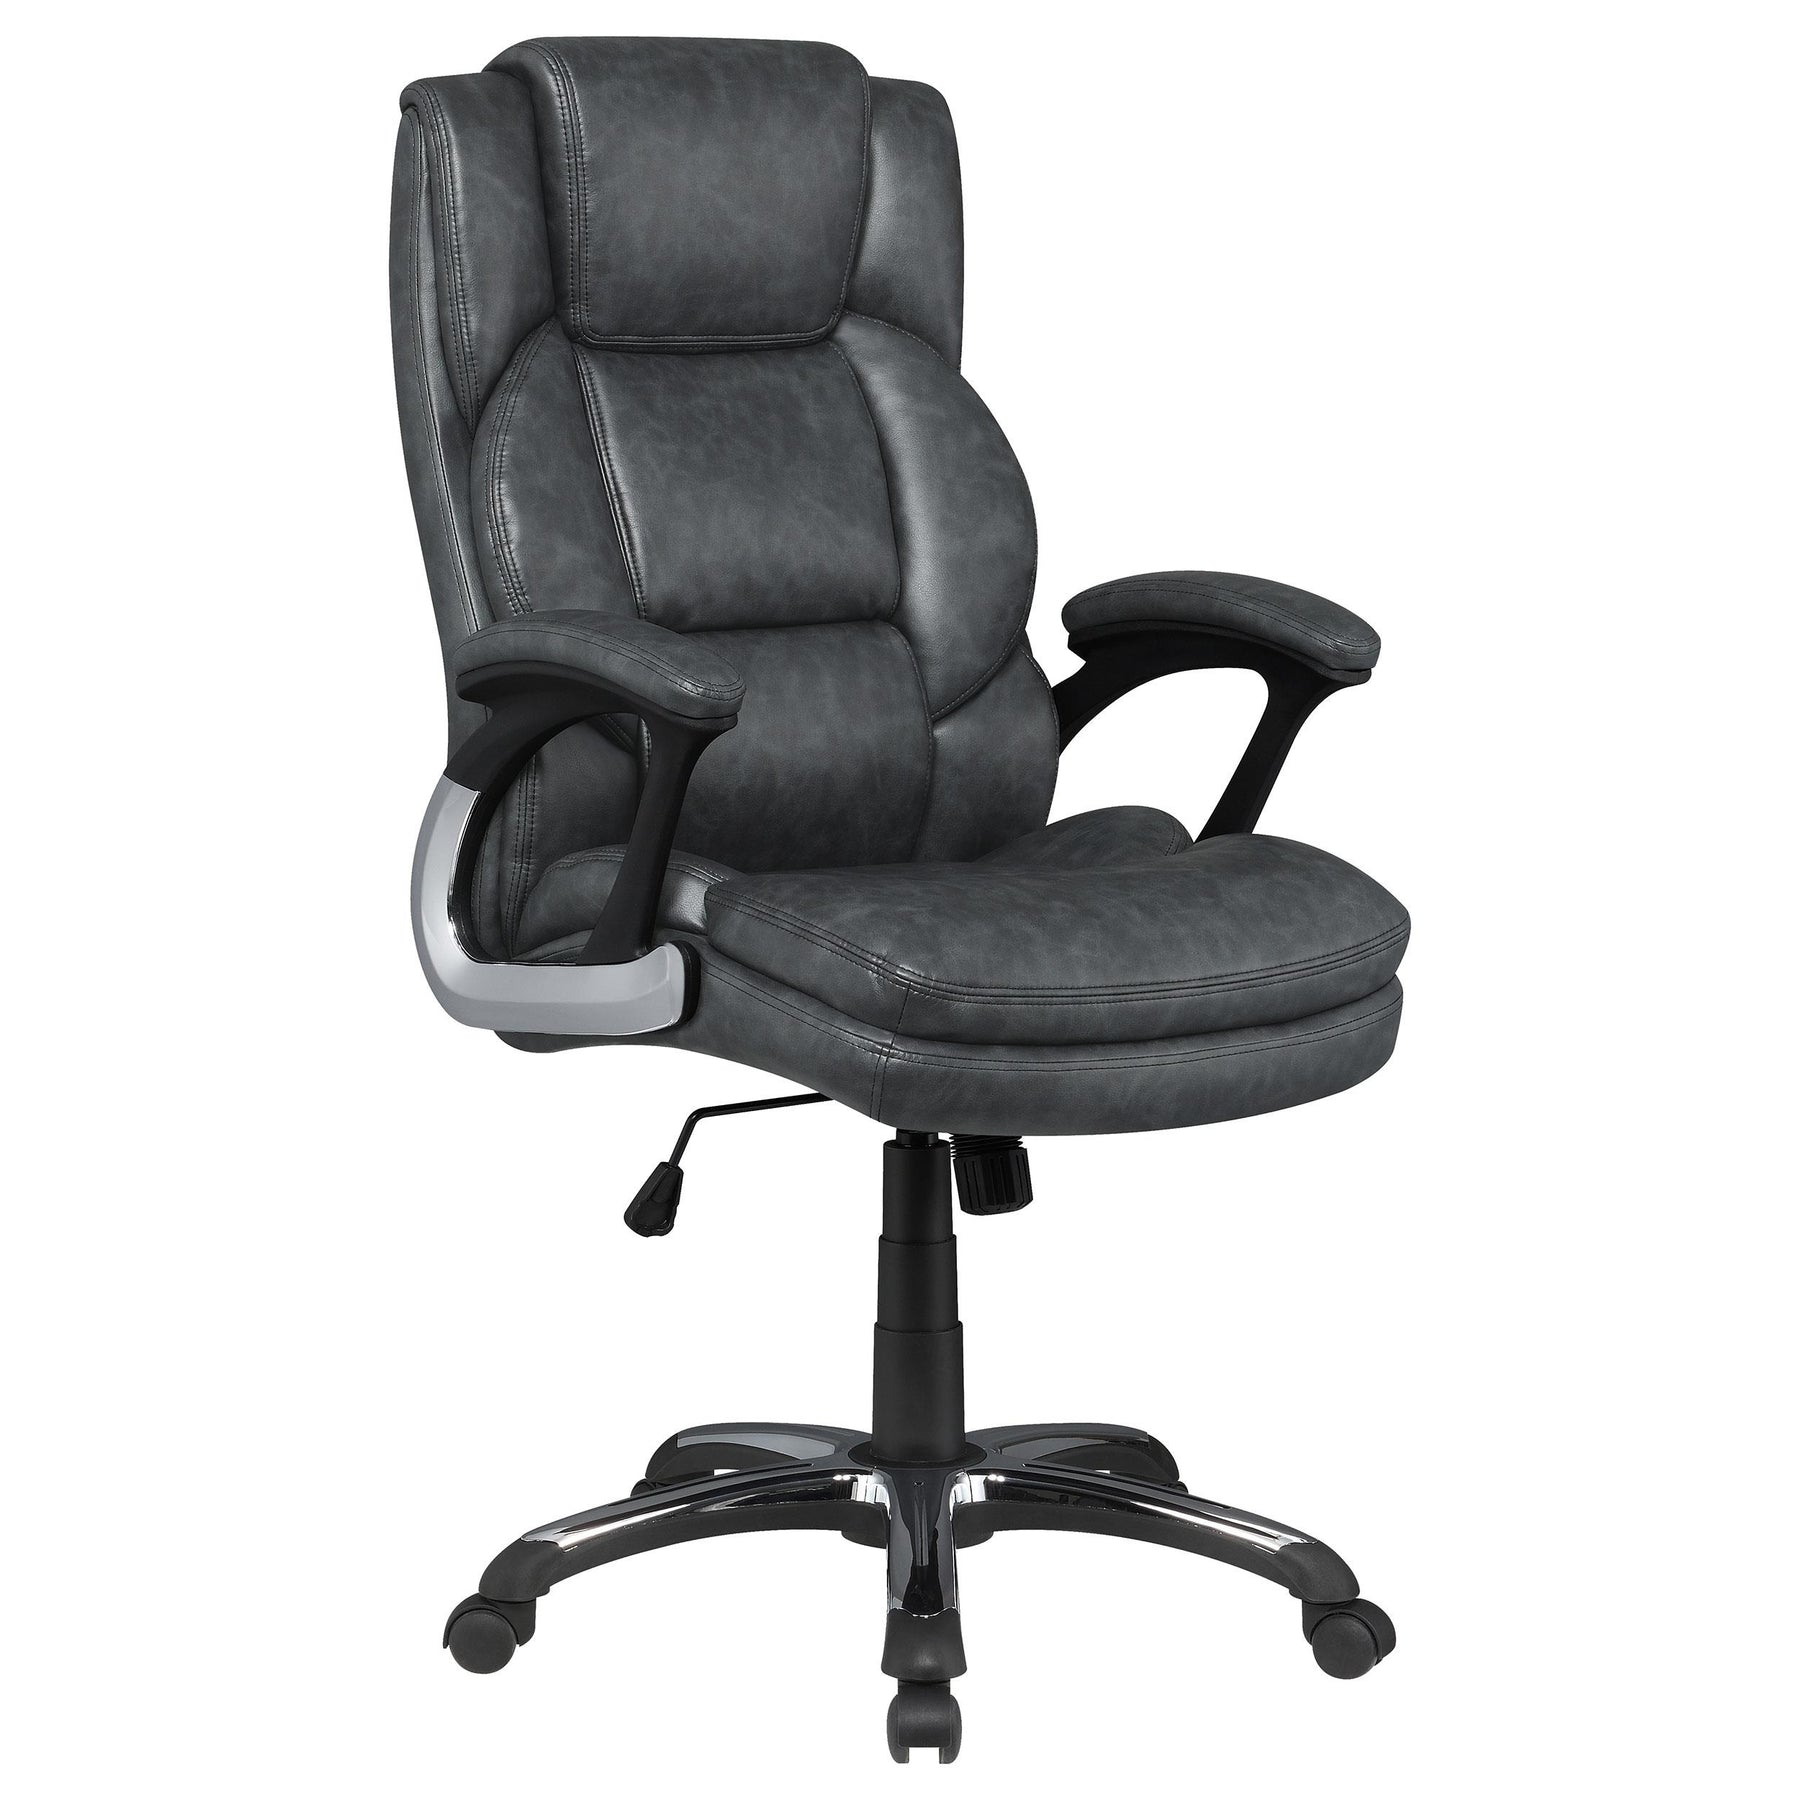 Nerris Adjustable Height Office Chair with Padded Arm Grey and Black  Half Price Furniture